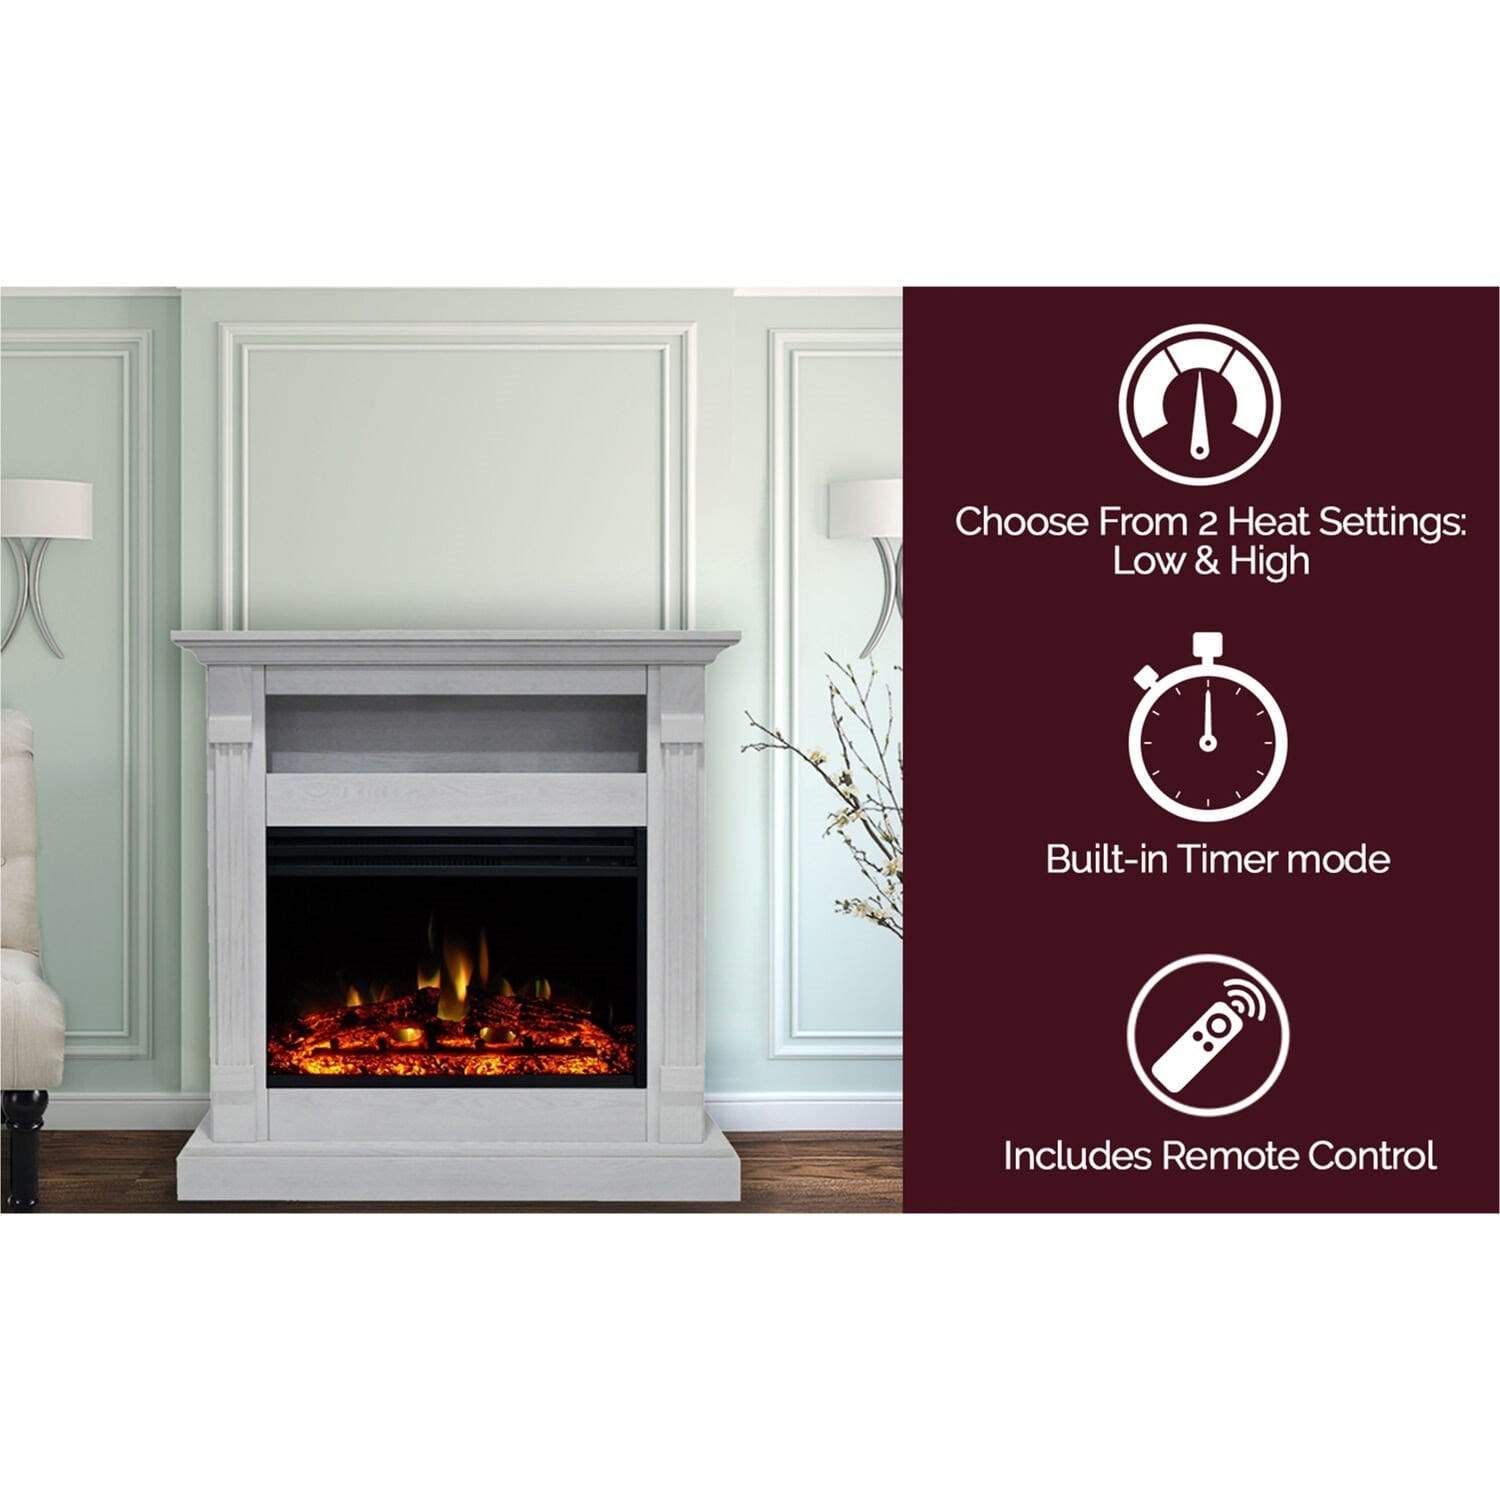 Cambridge Fireplace Mantels and Entertainment Centers Cambridge Sienna 34-In. Electric Fireplace Heater with Walnut Mantel, Enhanced Log Display, Multi-Color Flames, and Remote Control,